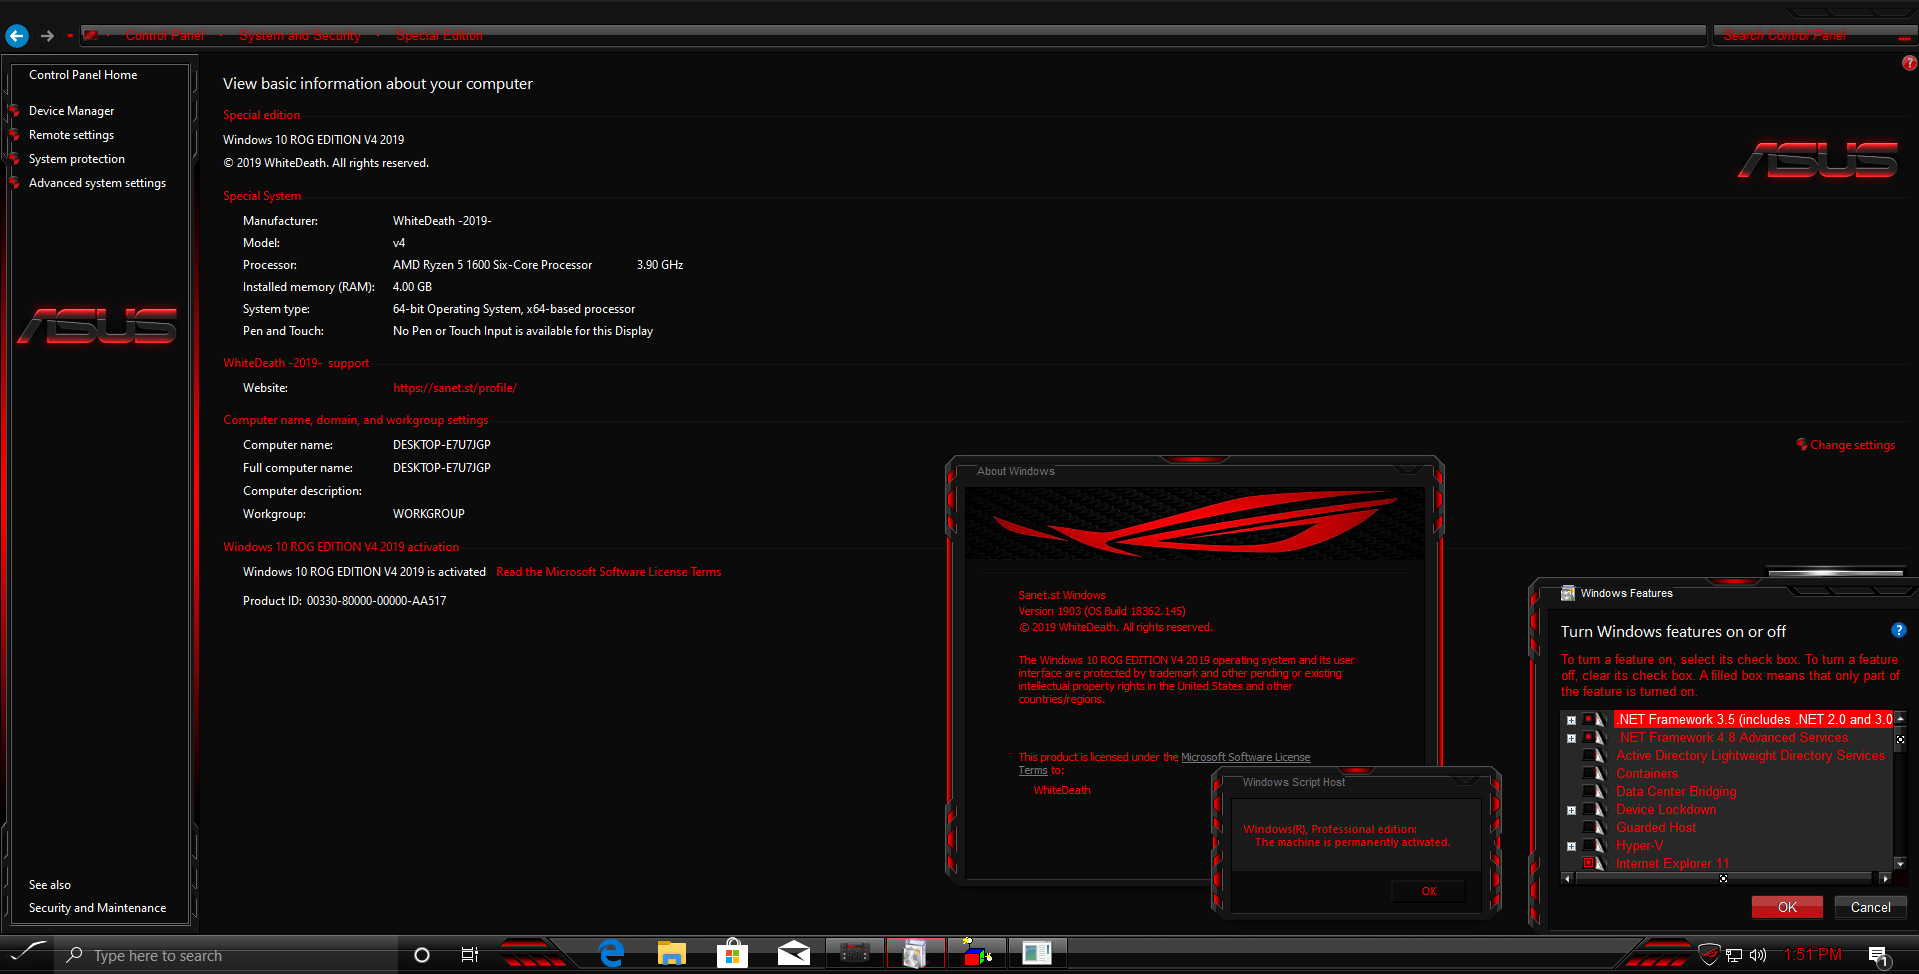 Windows 10 Rog Edition V4 X64 Permantly Activated 2019 Softarchive